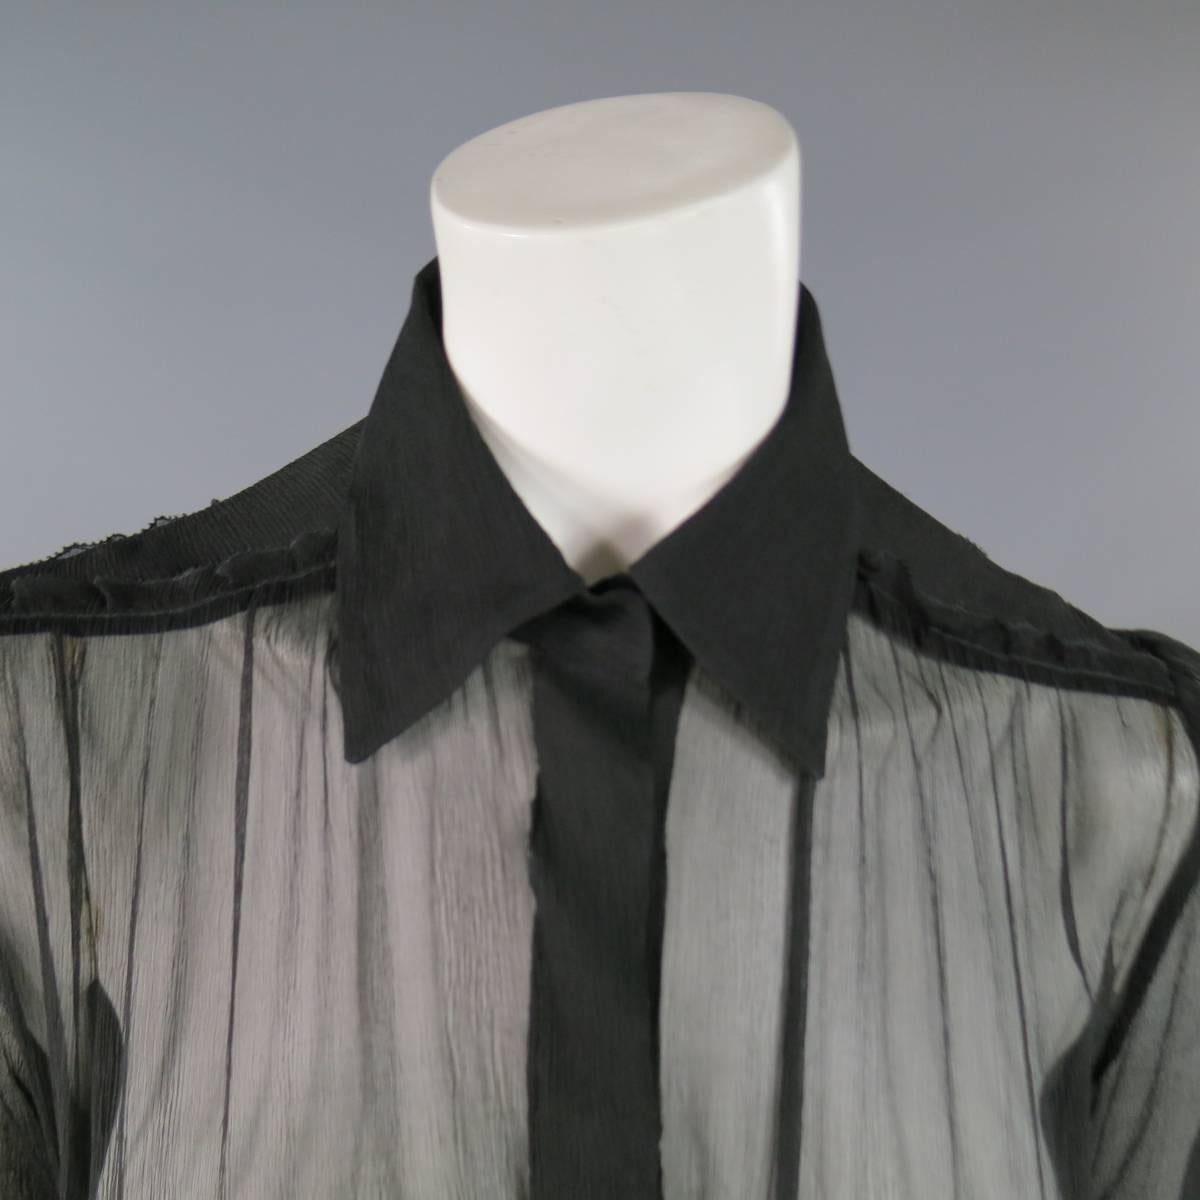 This fabulous JEAN PAUL GAULTIER blouse comes in sheer black textured chiffon with a pointed collar, snap closure raw edge ruffle trim, and elastic cinched waist with ruched tulle and satin bow details.  Made in Italy.
 
Excellent Pre-Owned